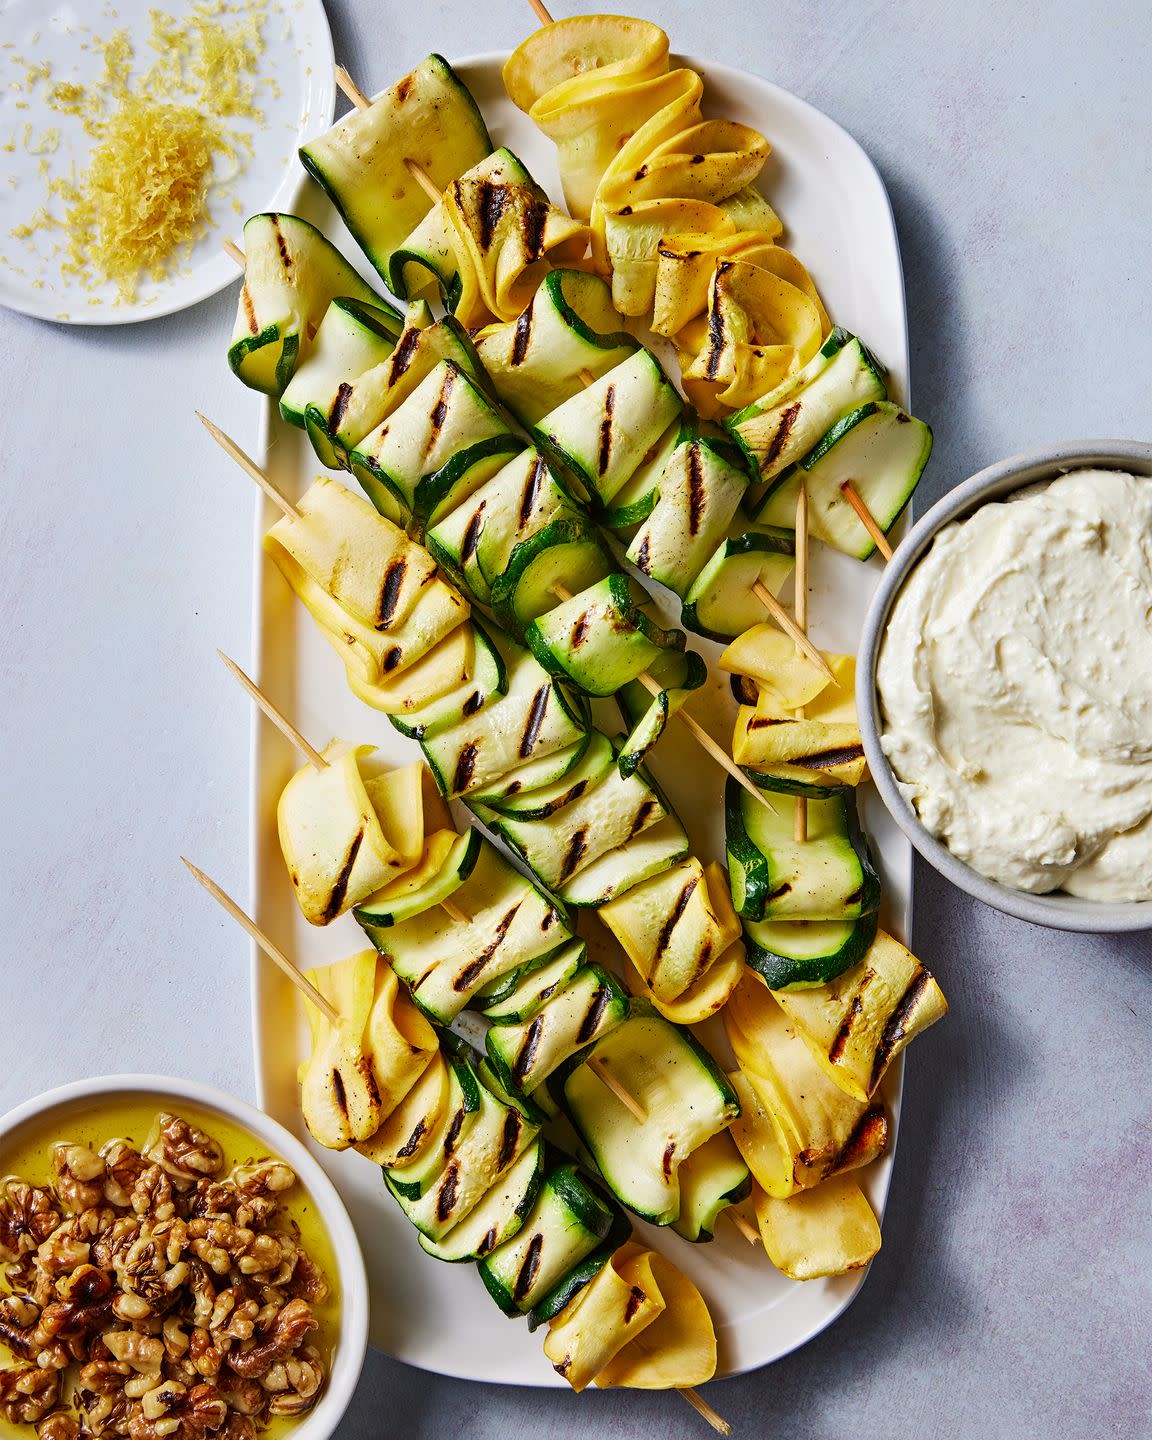 skewered and grilled zucchini planks topped with herby whipped ricotta and crunchy toasted walnuts